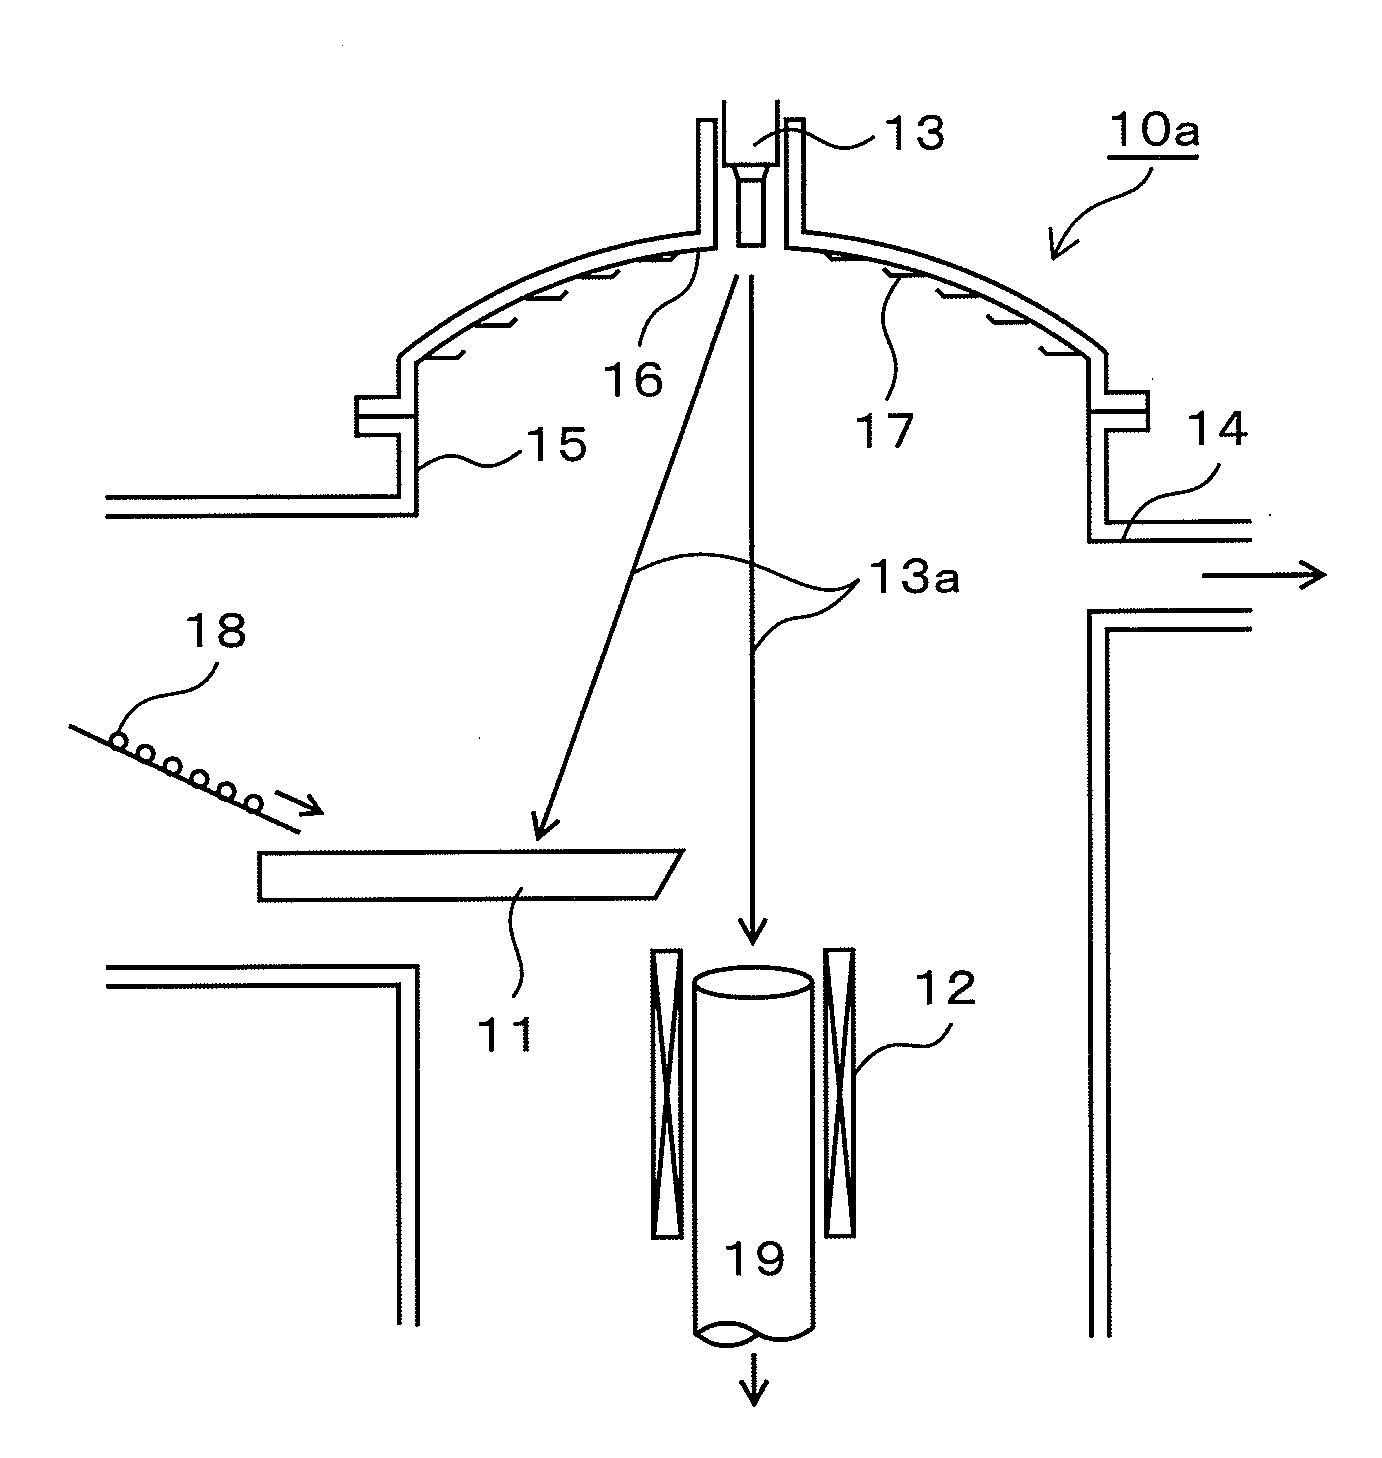 Apparatus For Melting Metal By Electron Beams And Process For Producing High-Melting Metal Ingot Using This Apparatus